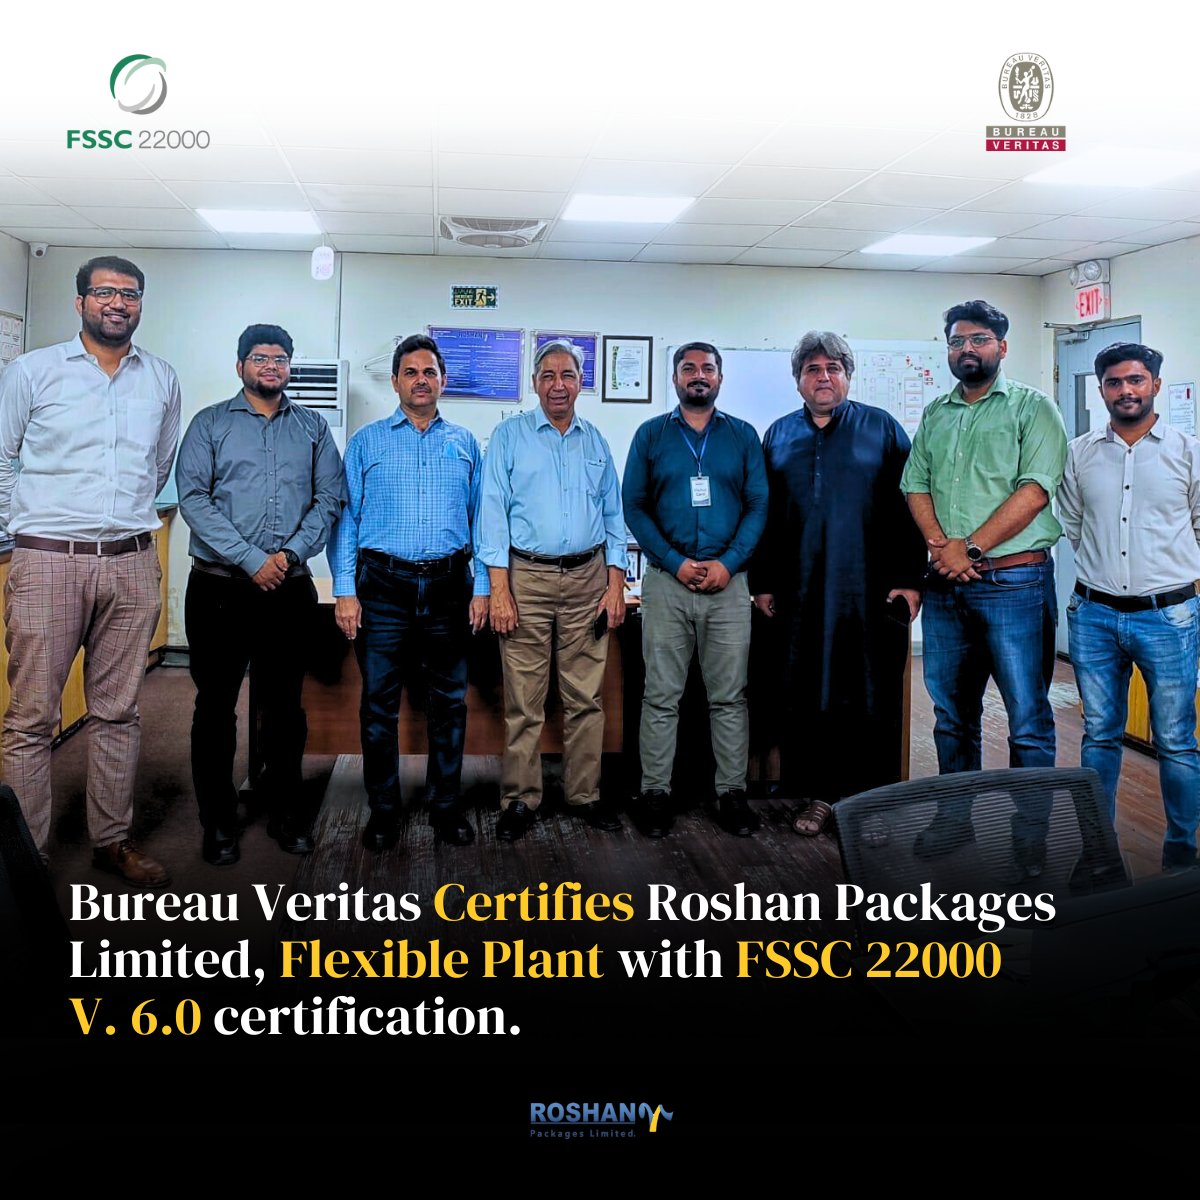 Excited to announce the successful completion of our FSSC v5.1 to v6.0 standards transition audit!

Throughout this process, our amazing team has shown transparency and steadfast commitment. 
#FSSC #Audit #BureauVeritas #Teamwork #QualityAssurance #RoshanPackages